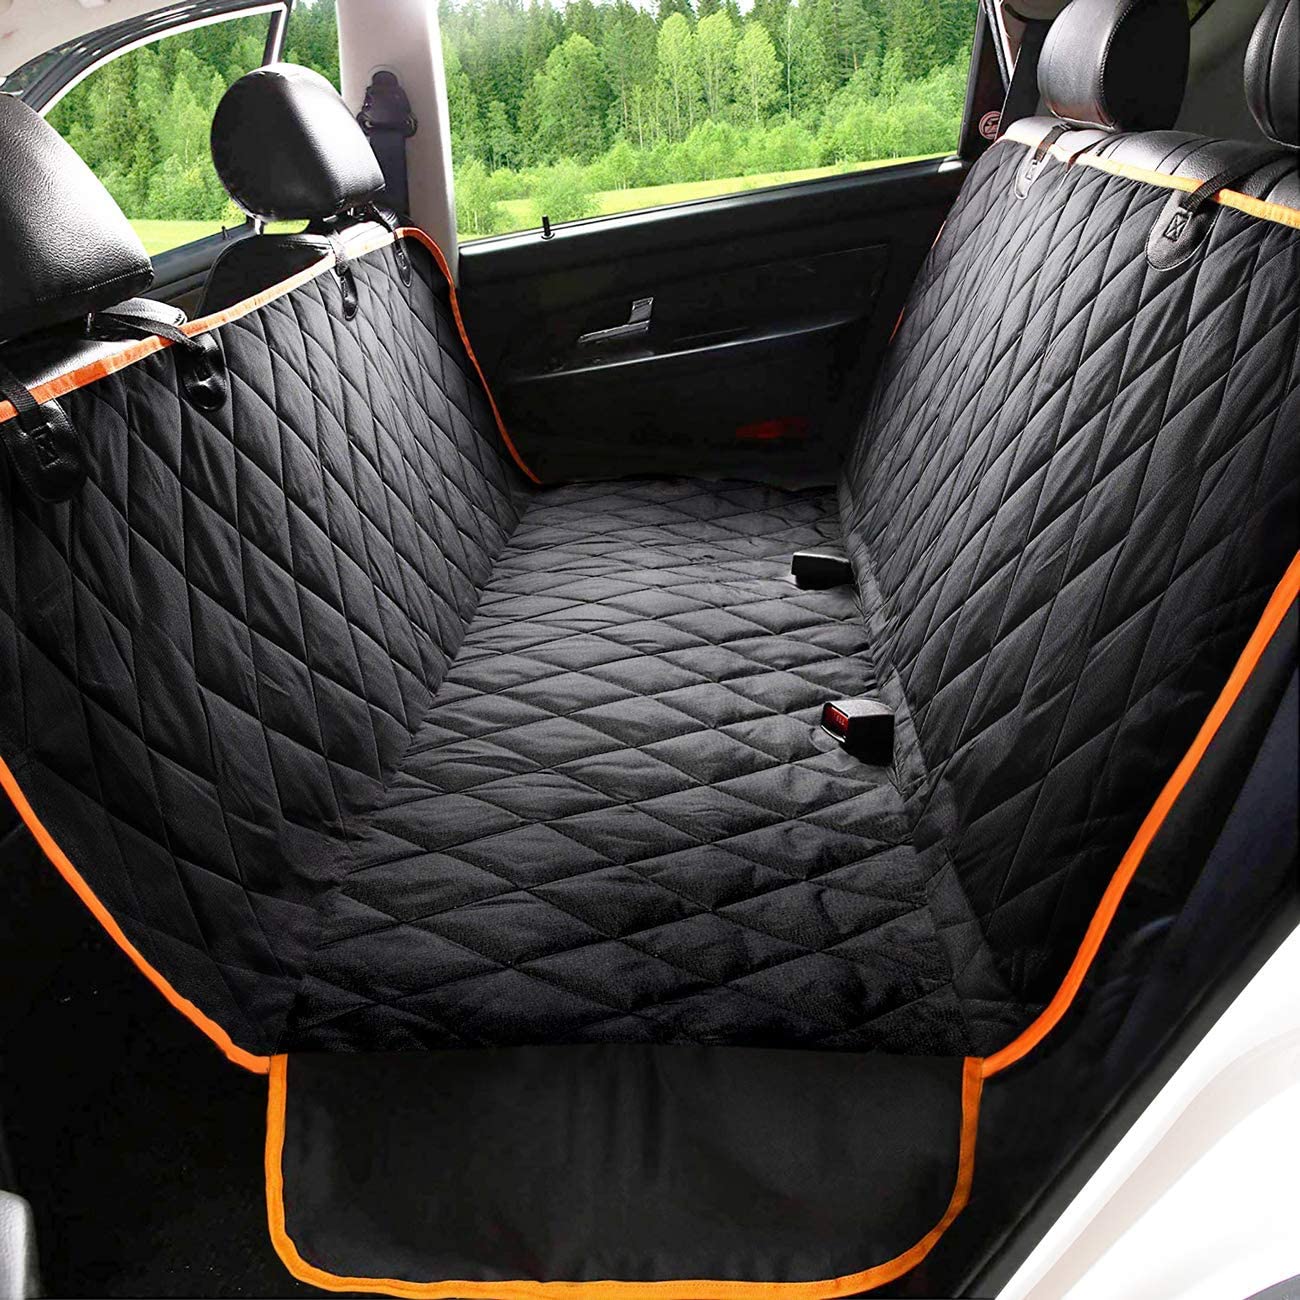 FANTIC Dog Car Seat Covers, 100% Waterproof with Door Protection